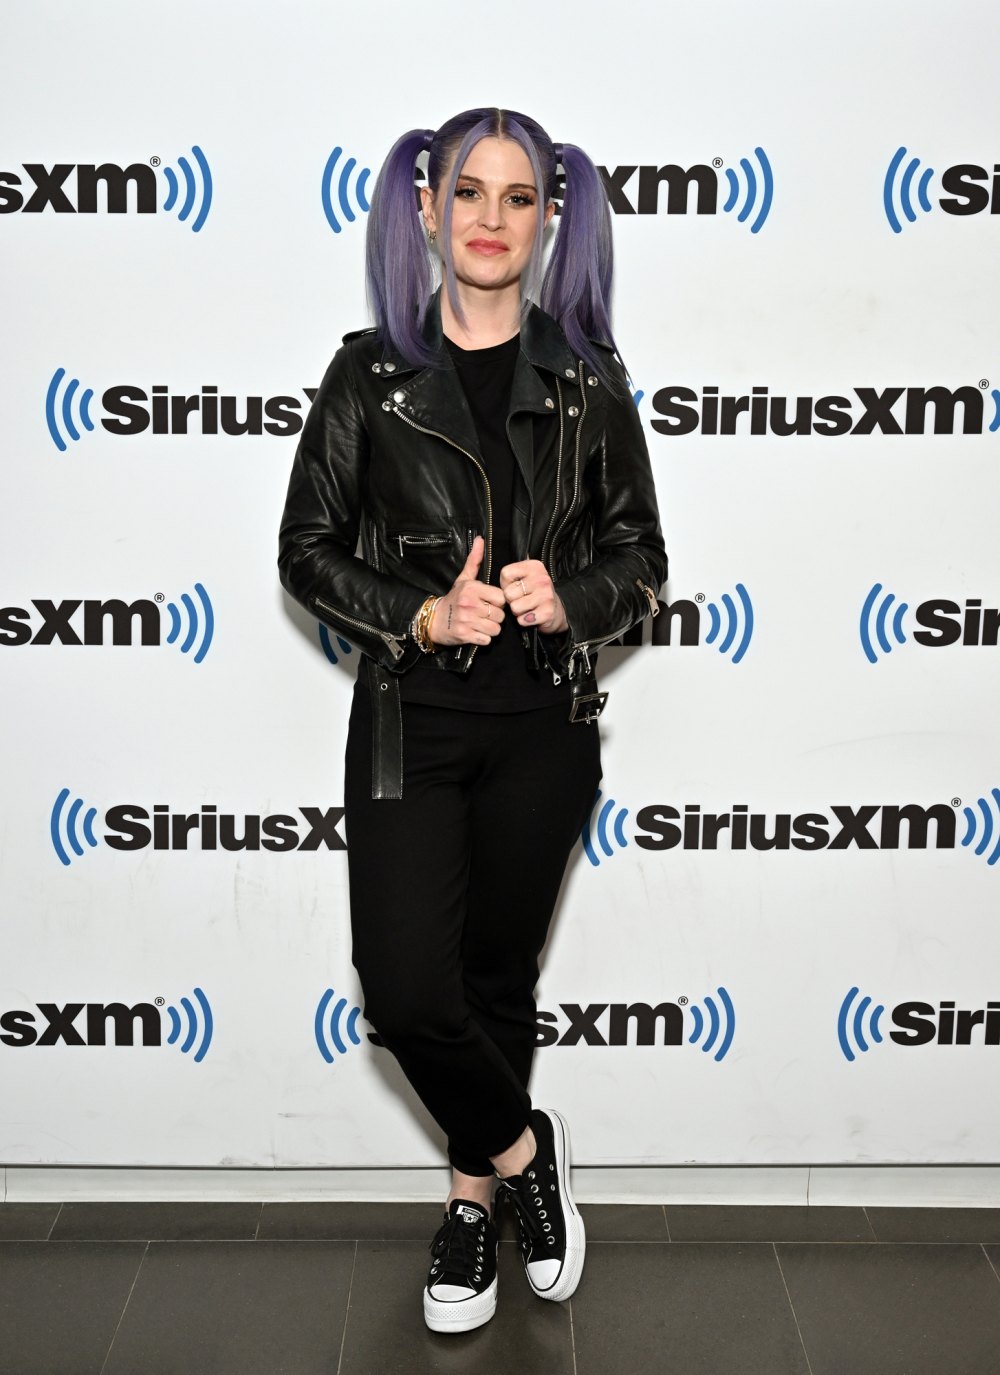 Kelly Osbourne Breaks Silence on Her 2015 Controversial Comments